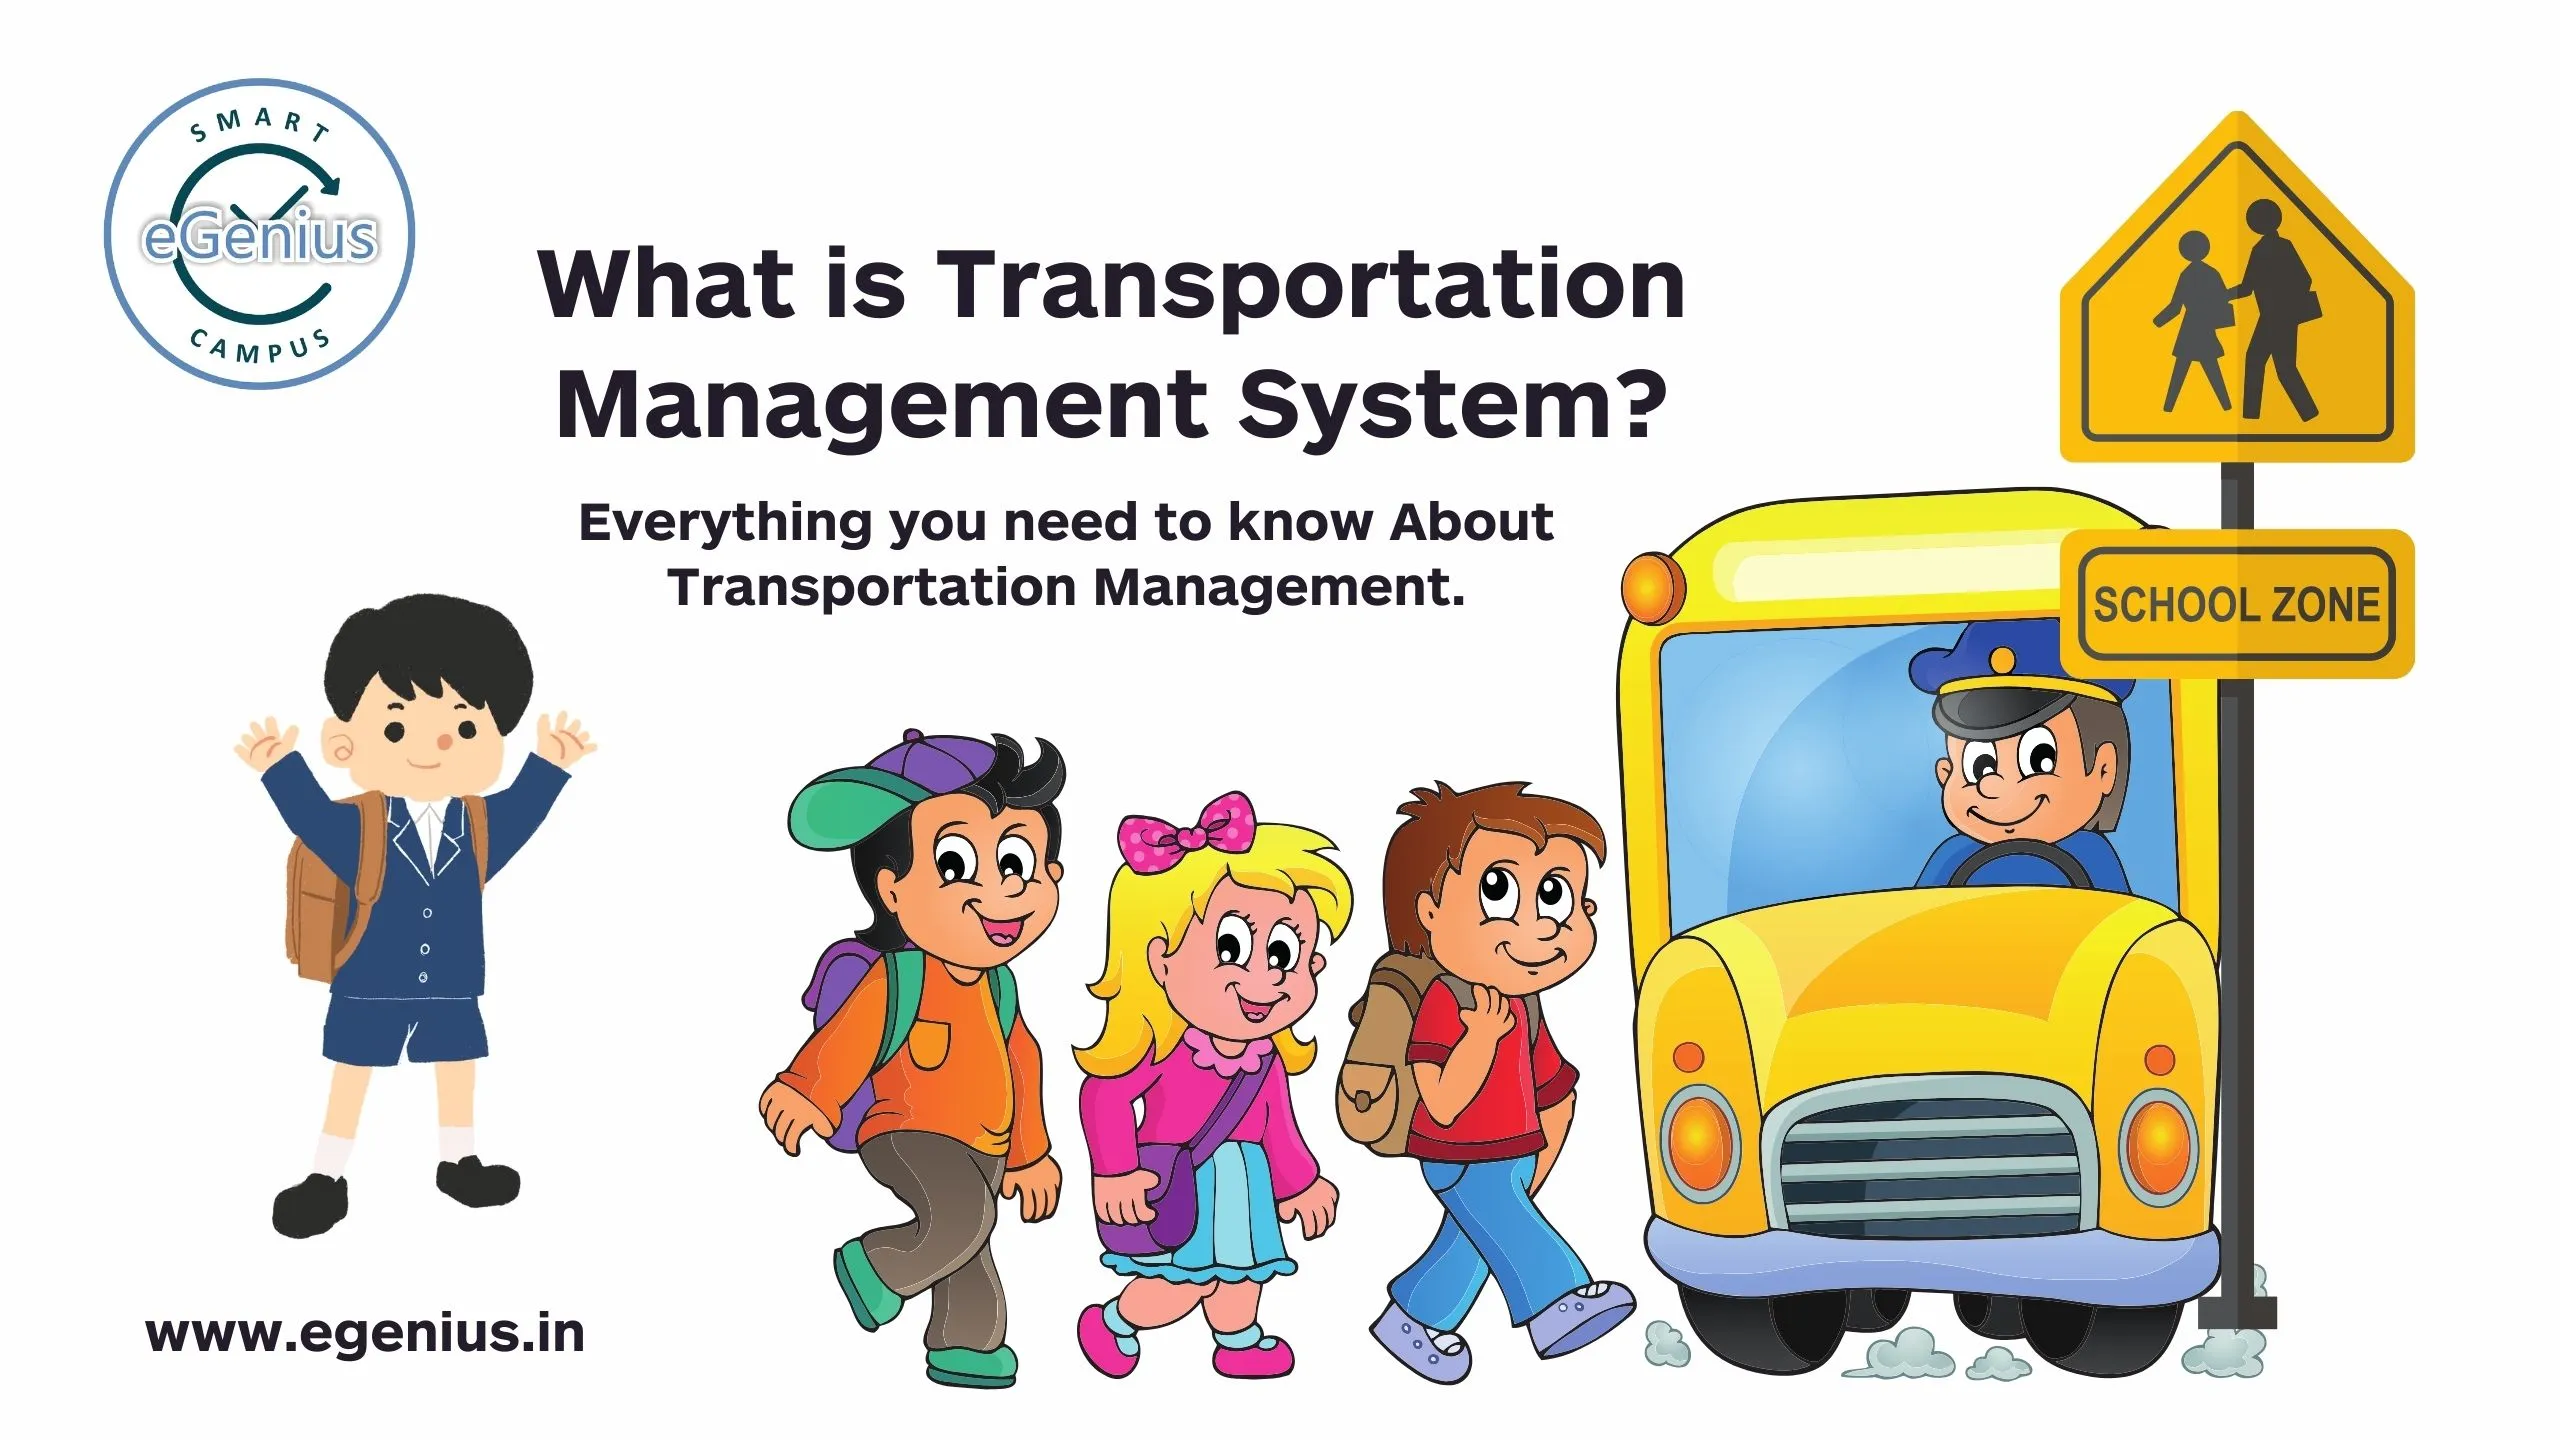 What is Transportation Management System? Everything you need to know about Transportation Management. 